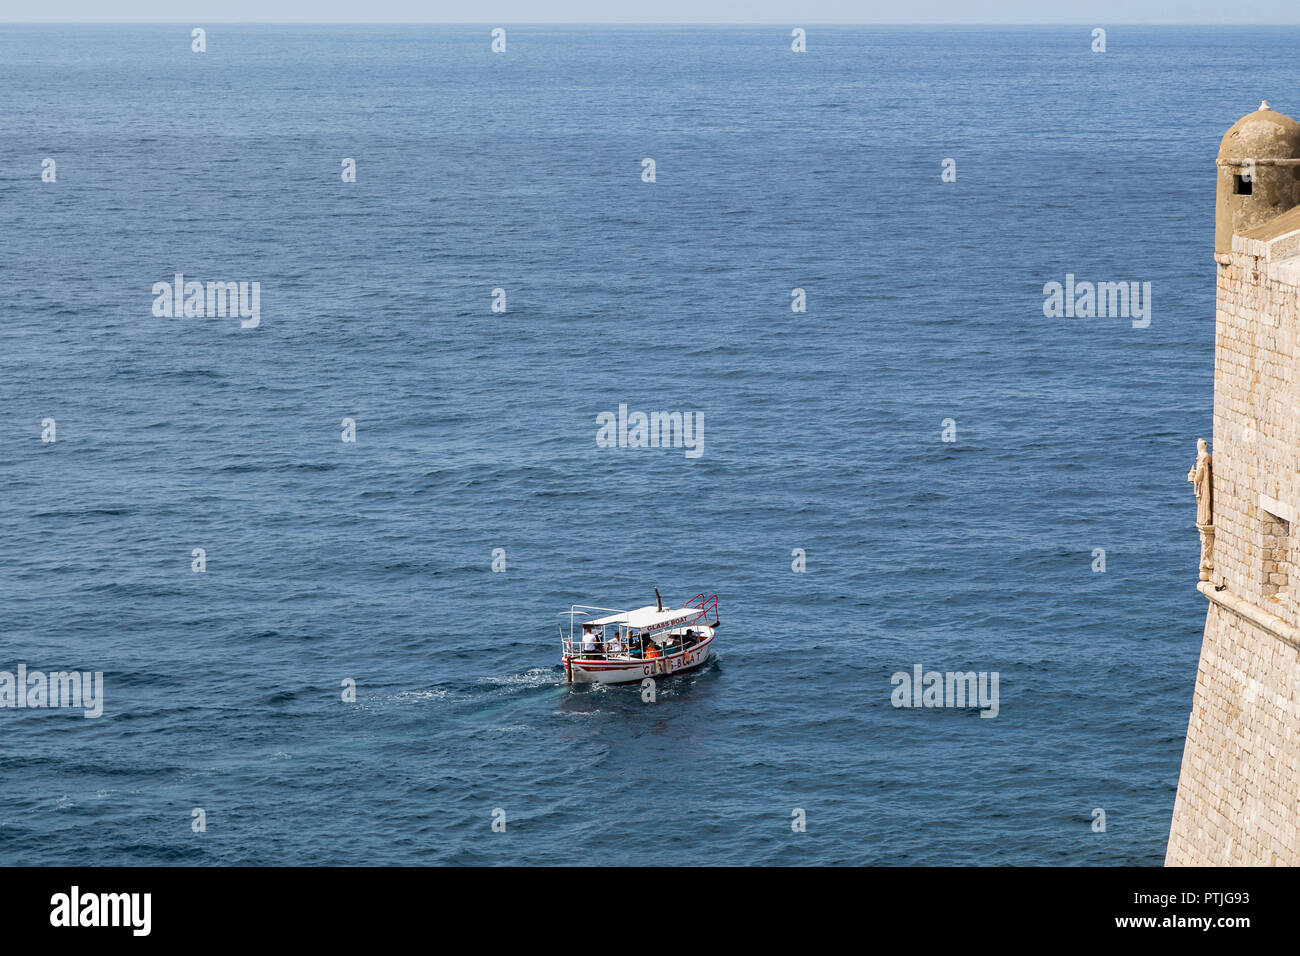 Boat passing the old walls of Dubrovnik. Stock Photo